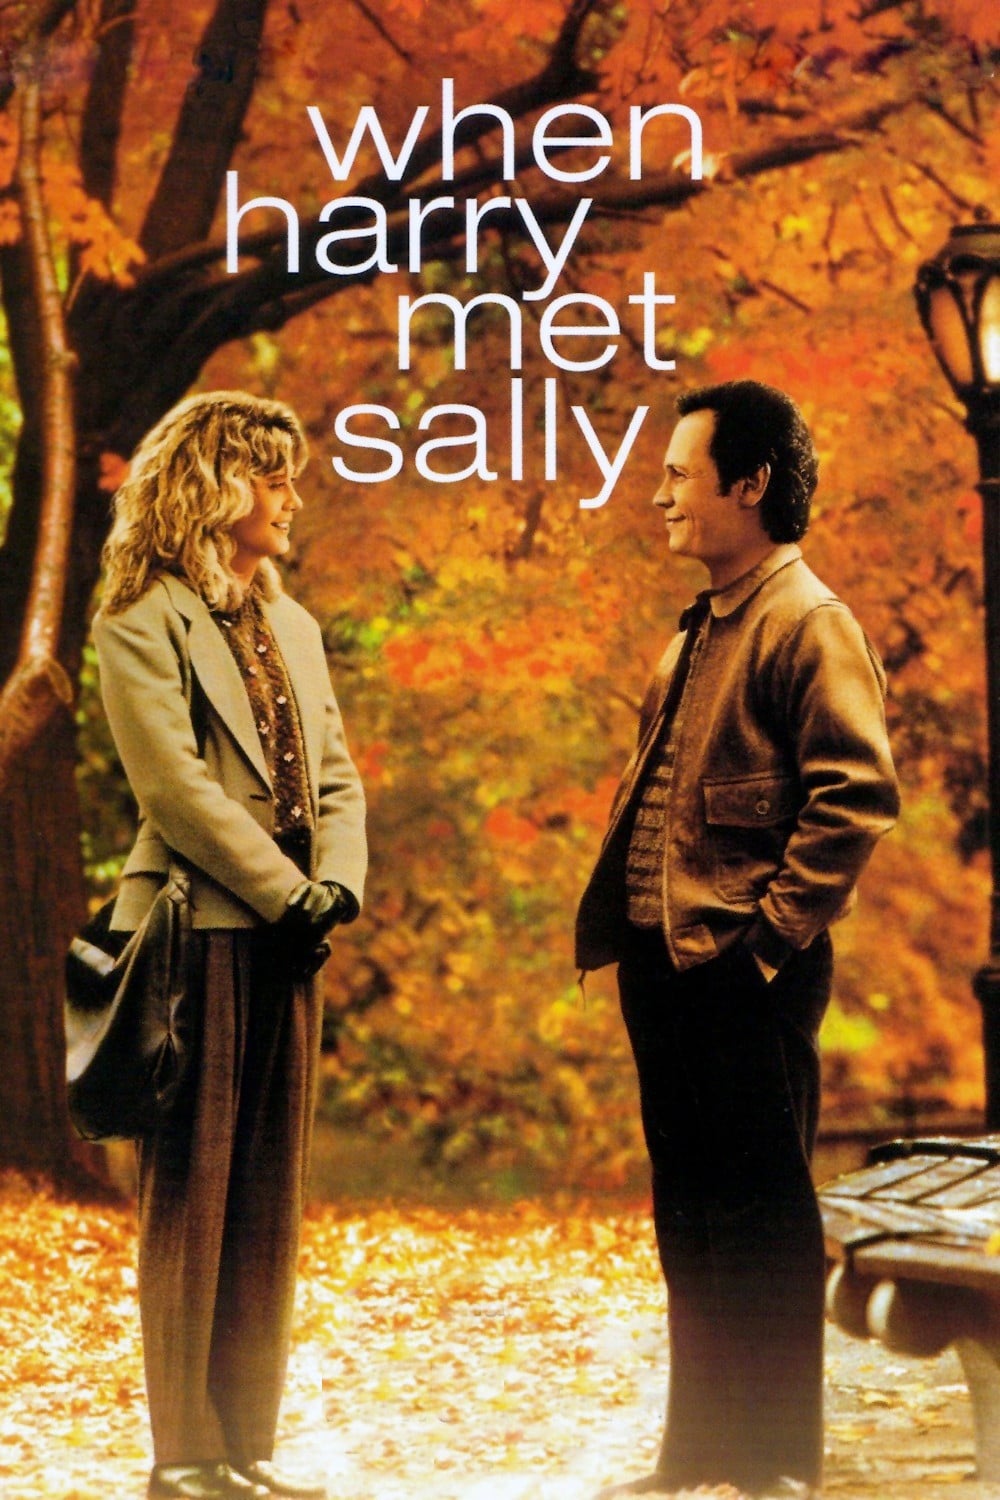 quand harry rencontre sally bande annonce